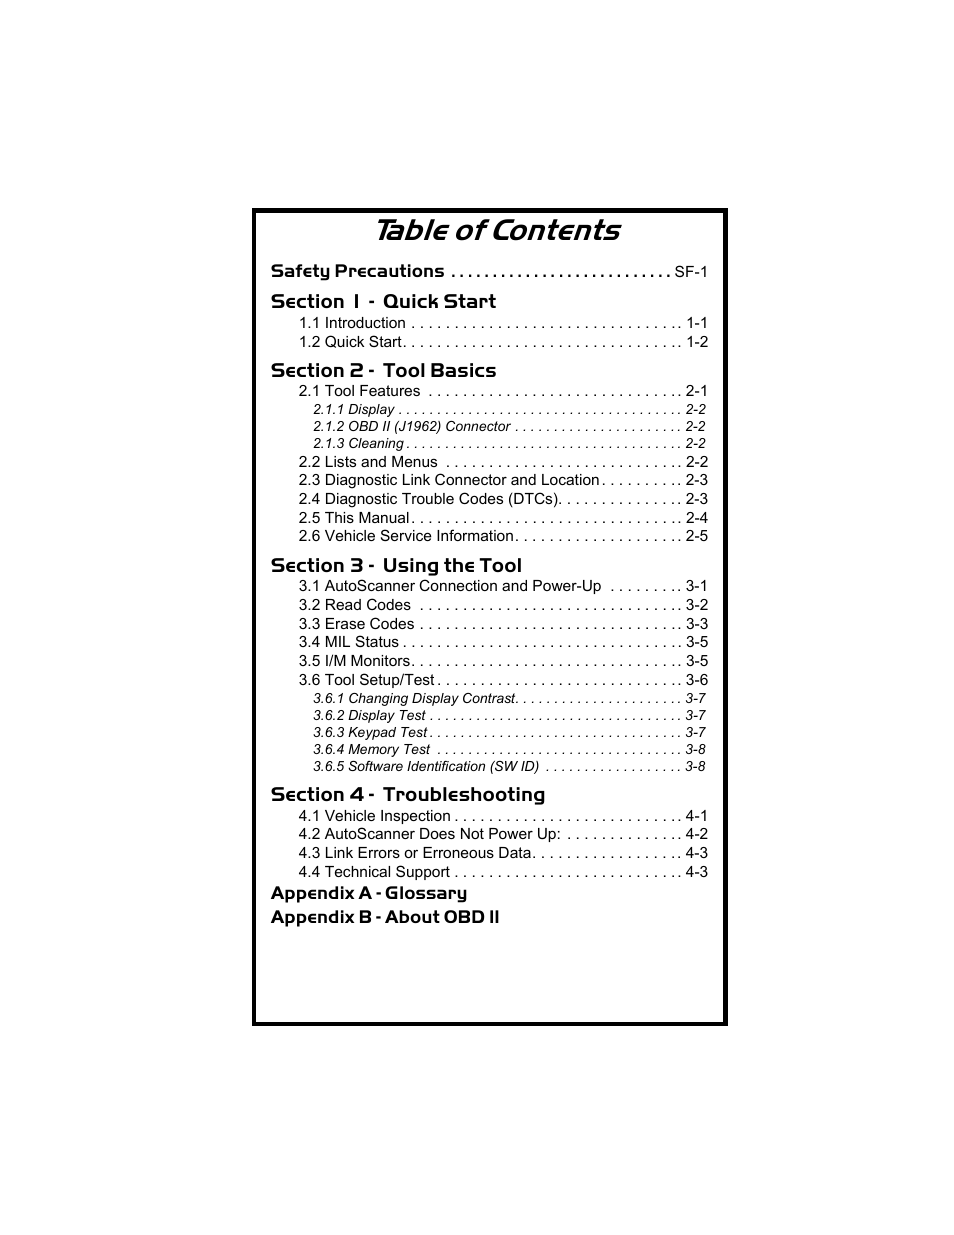 Actron CP9135 OBD II AutoScanner User Manual | Page 3 / 120 | Original